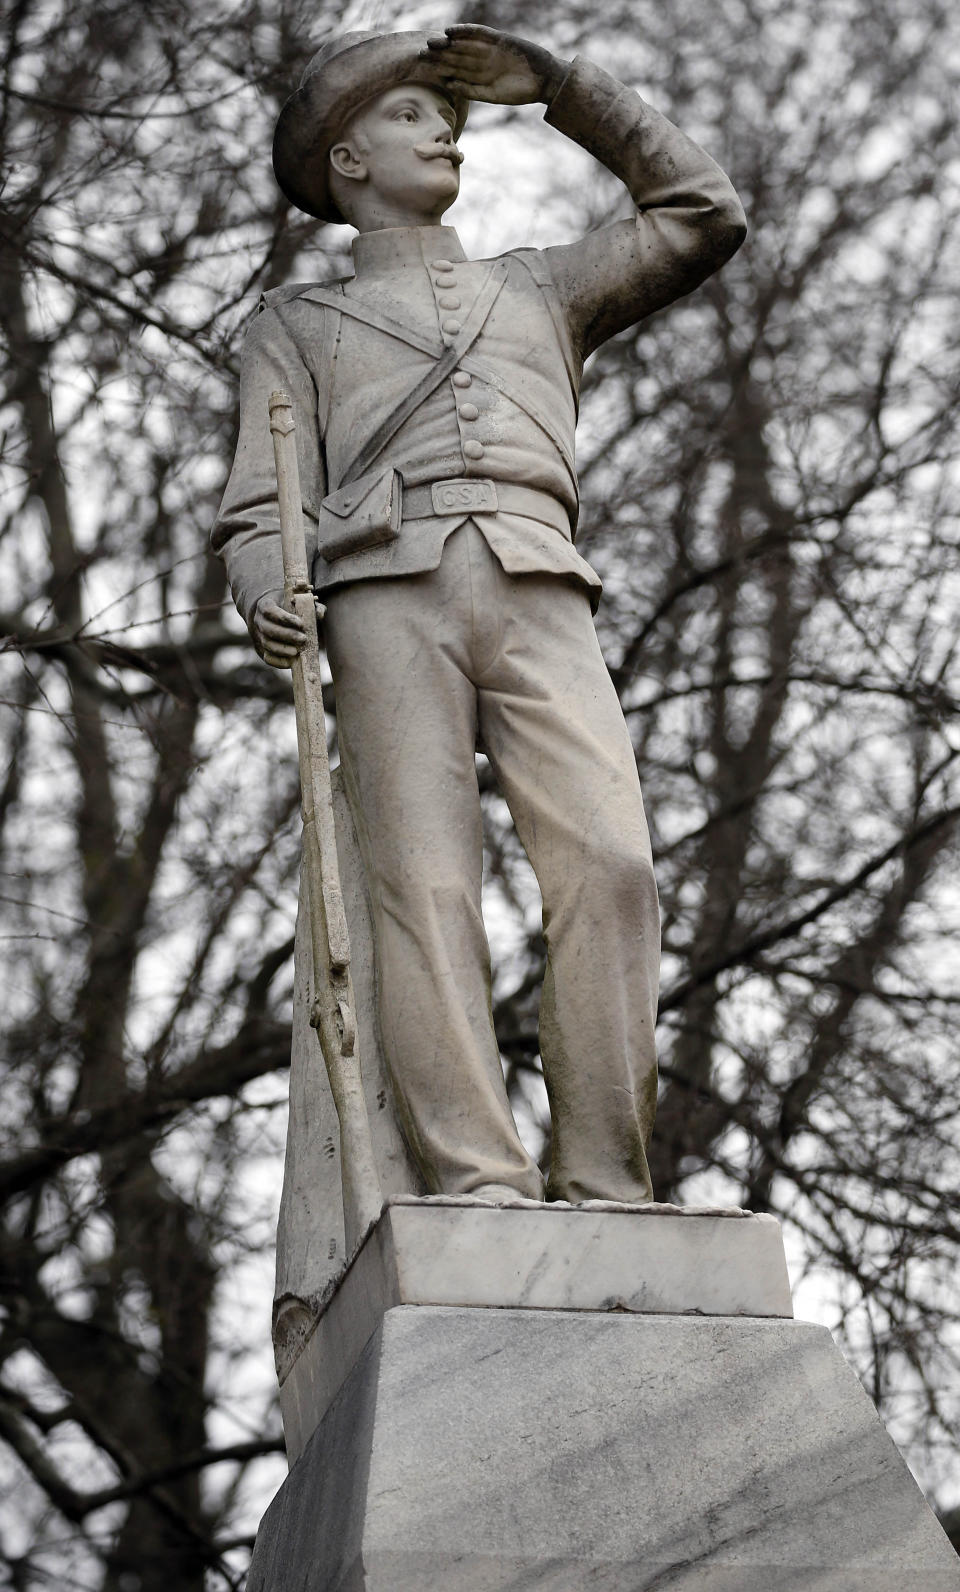 This Feb. 23, 2019 photog shows the Confederate soldier monument at the University of Mississippi in Oxford, Miss. The Associated Student Body Senate voted 47-0, Tuesday, March 5, 2019, for a resolution asking the university's administrators to move the statue to the Confederate cemetery, behind the Tad Smith Coliseum, also on campus. (AP Photo/Rogelio V. Solis)